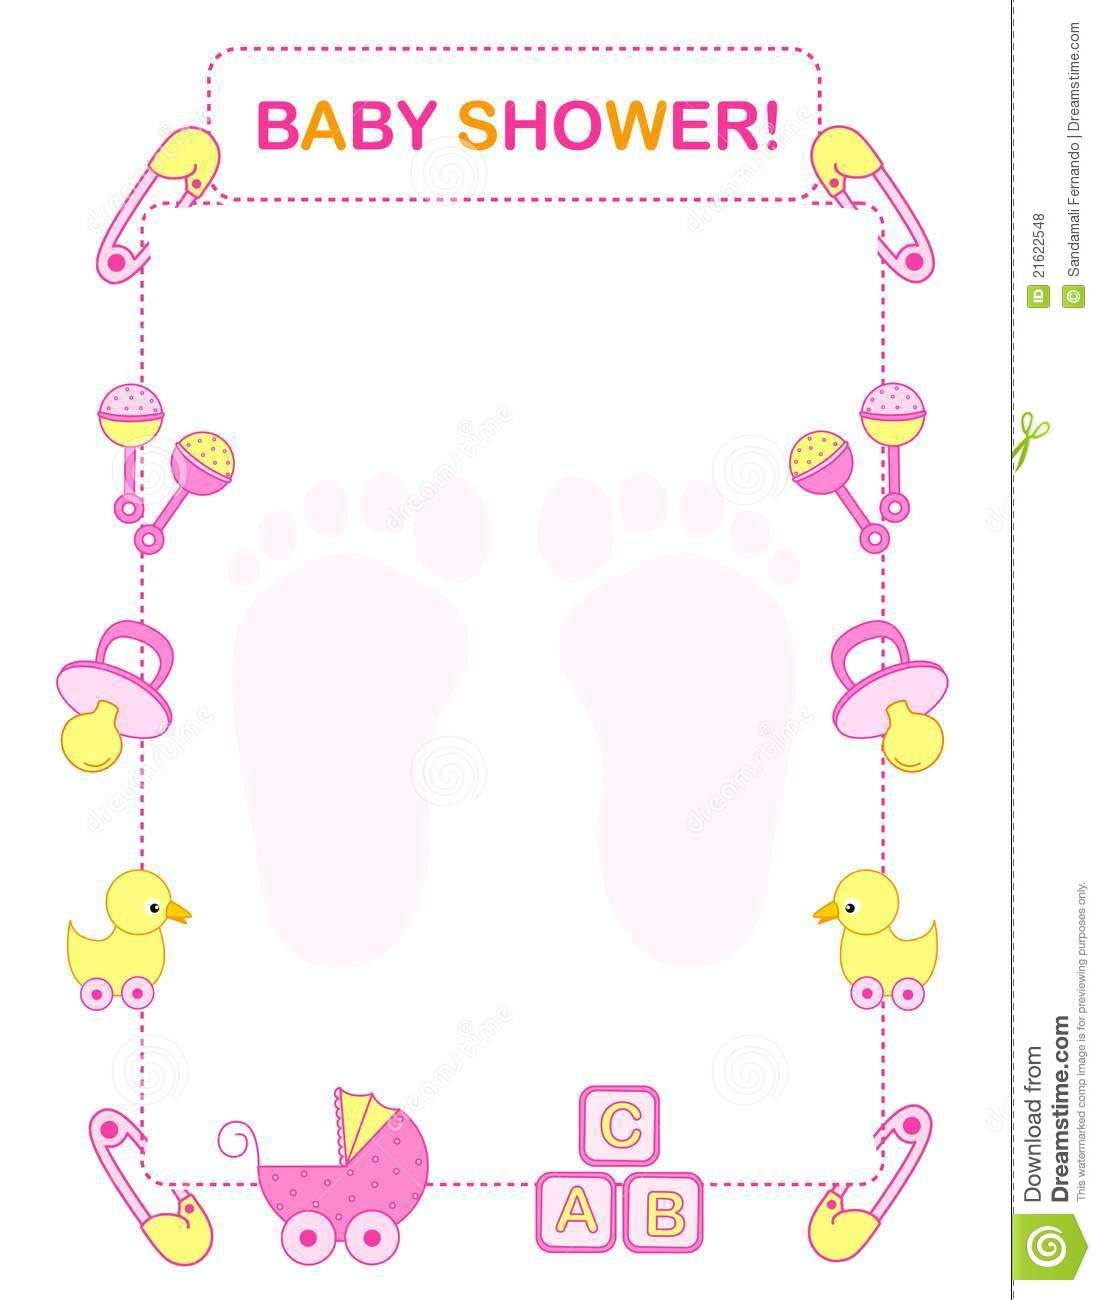 Free Printable Baby Shower Clip Art (59 ) | Baby Shower In 2019 - Free Printable Baby Shower Clip Art